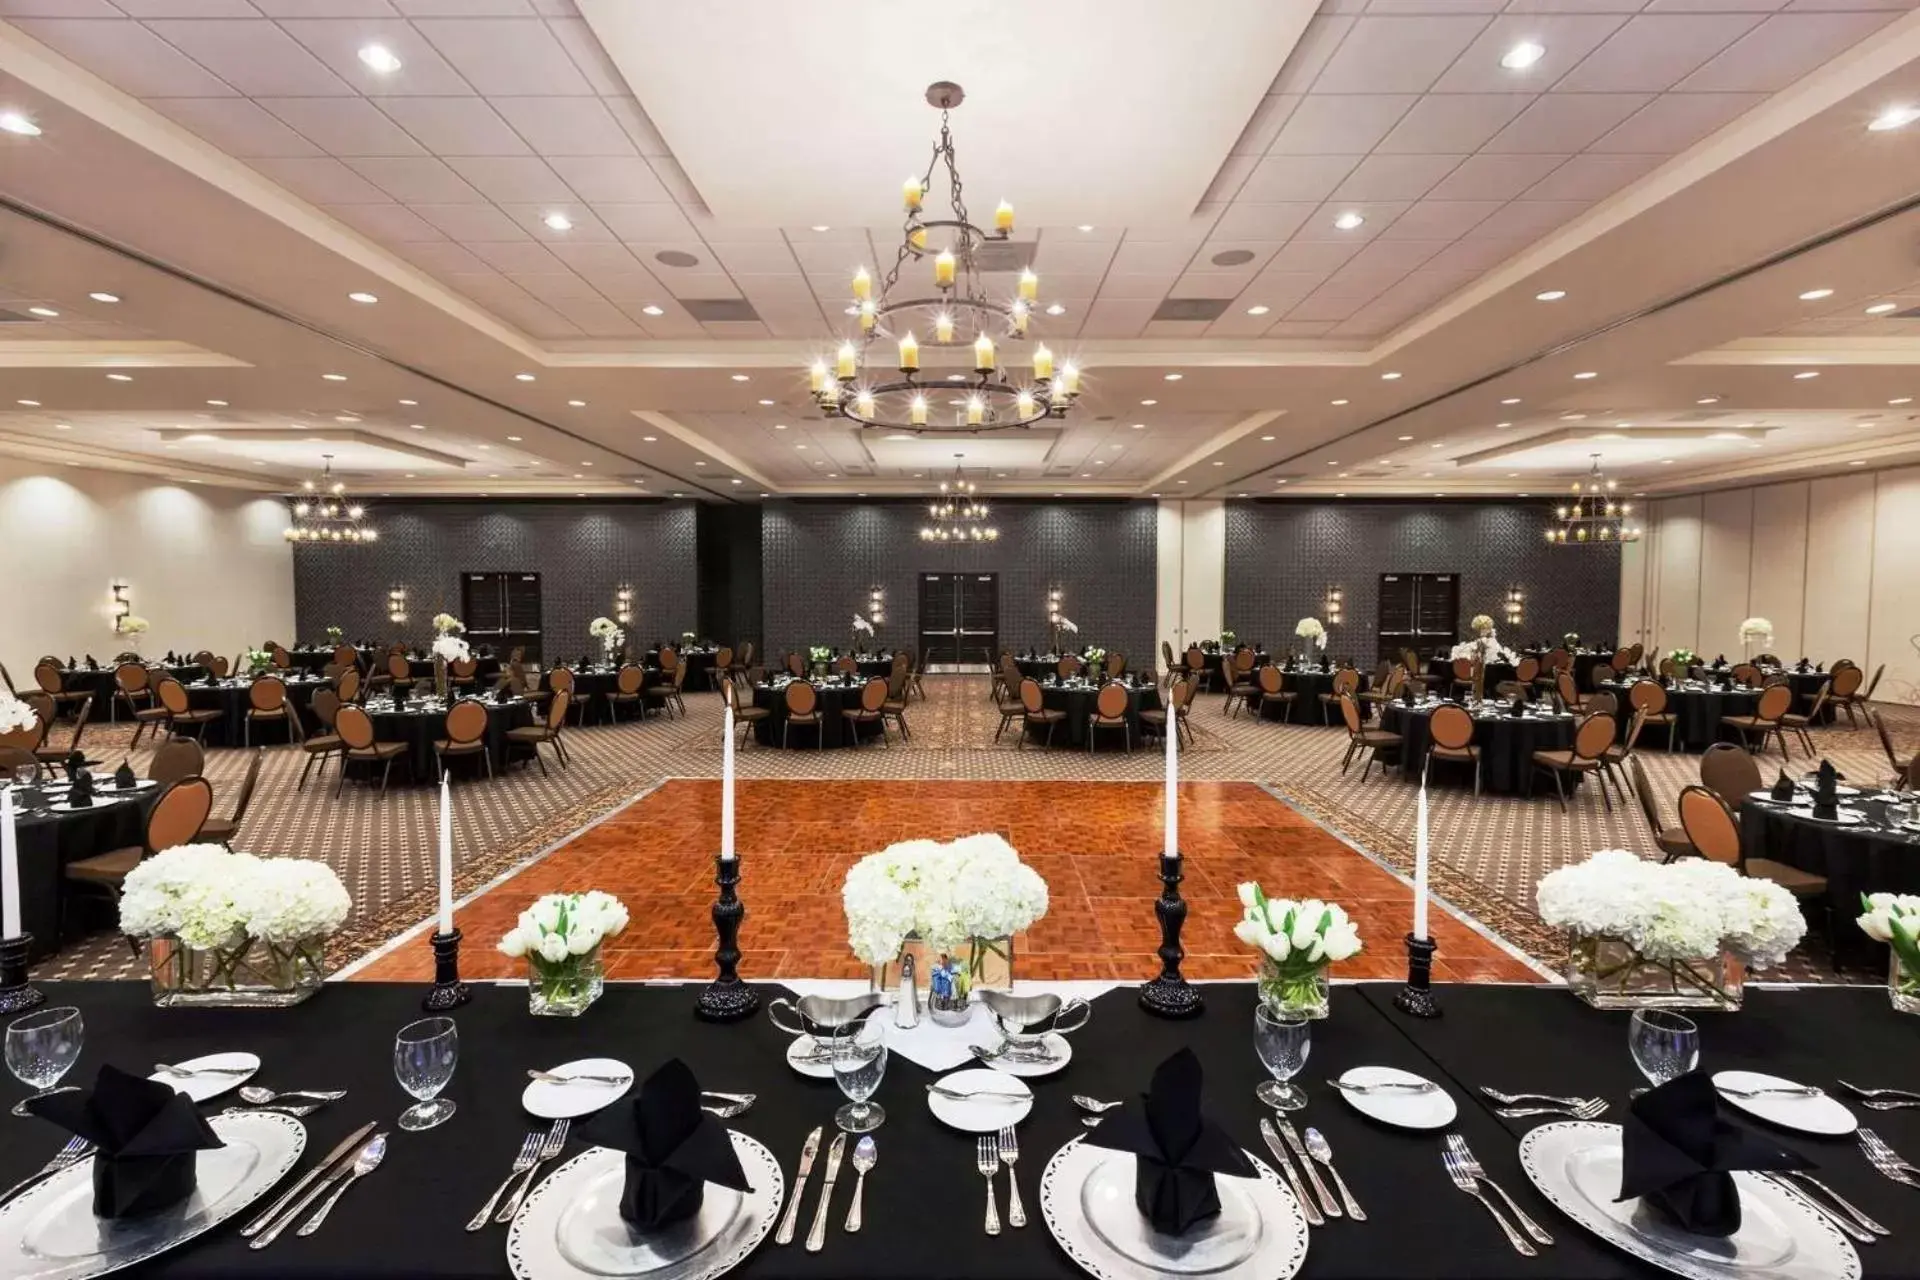 Meeting/conference room, Banquet Facilities in Hilton Garden Inn Denison/Sherman/At Texoma Event Center